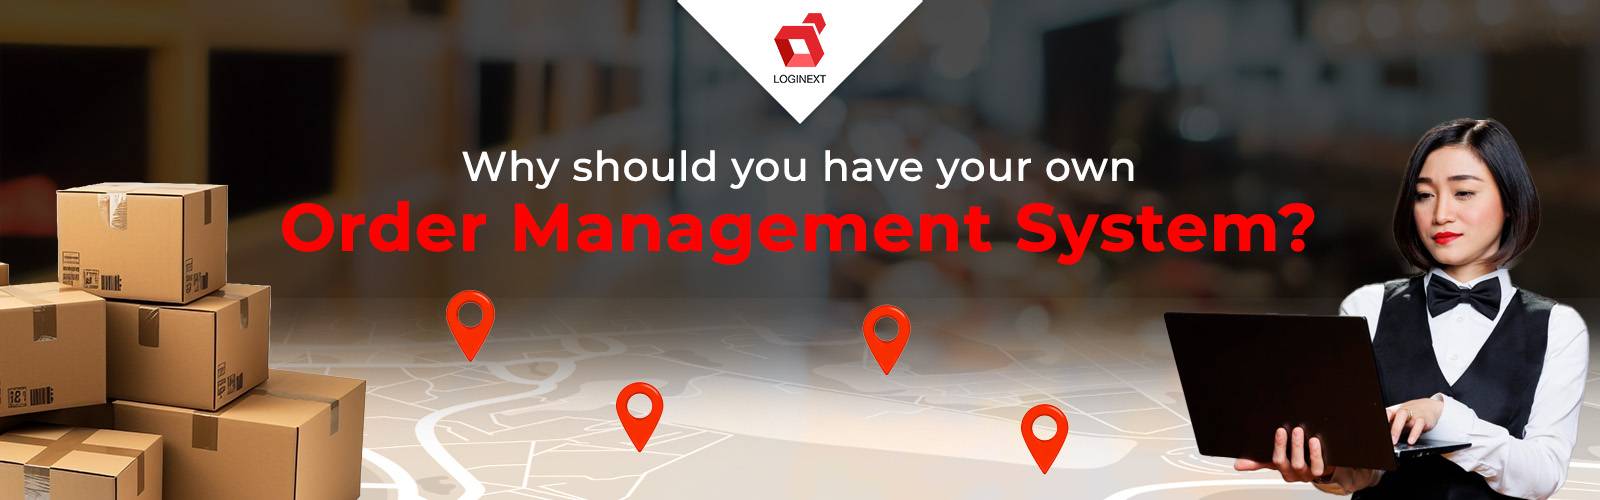 Why should one invest in Order Management System?